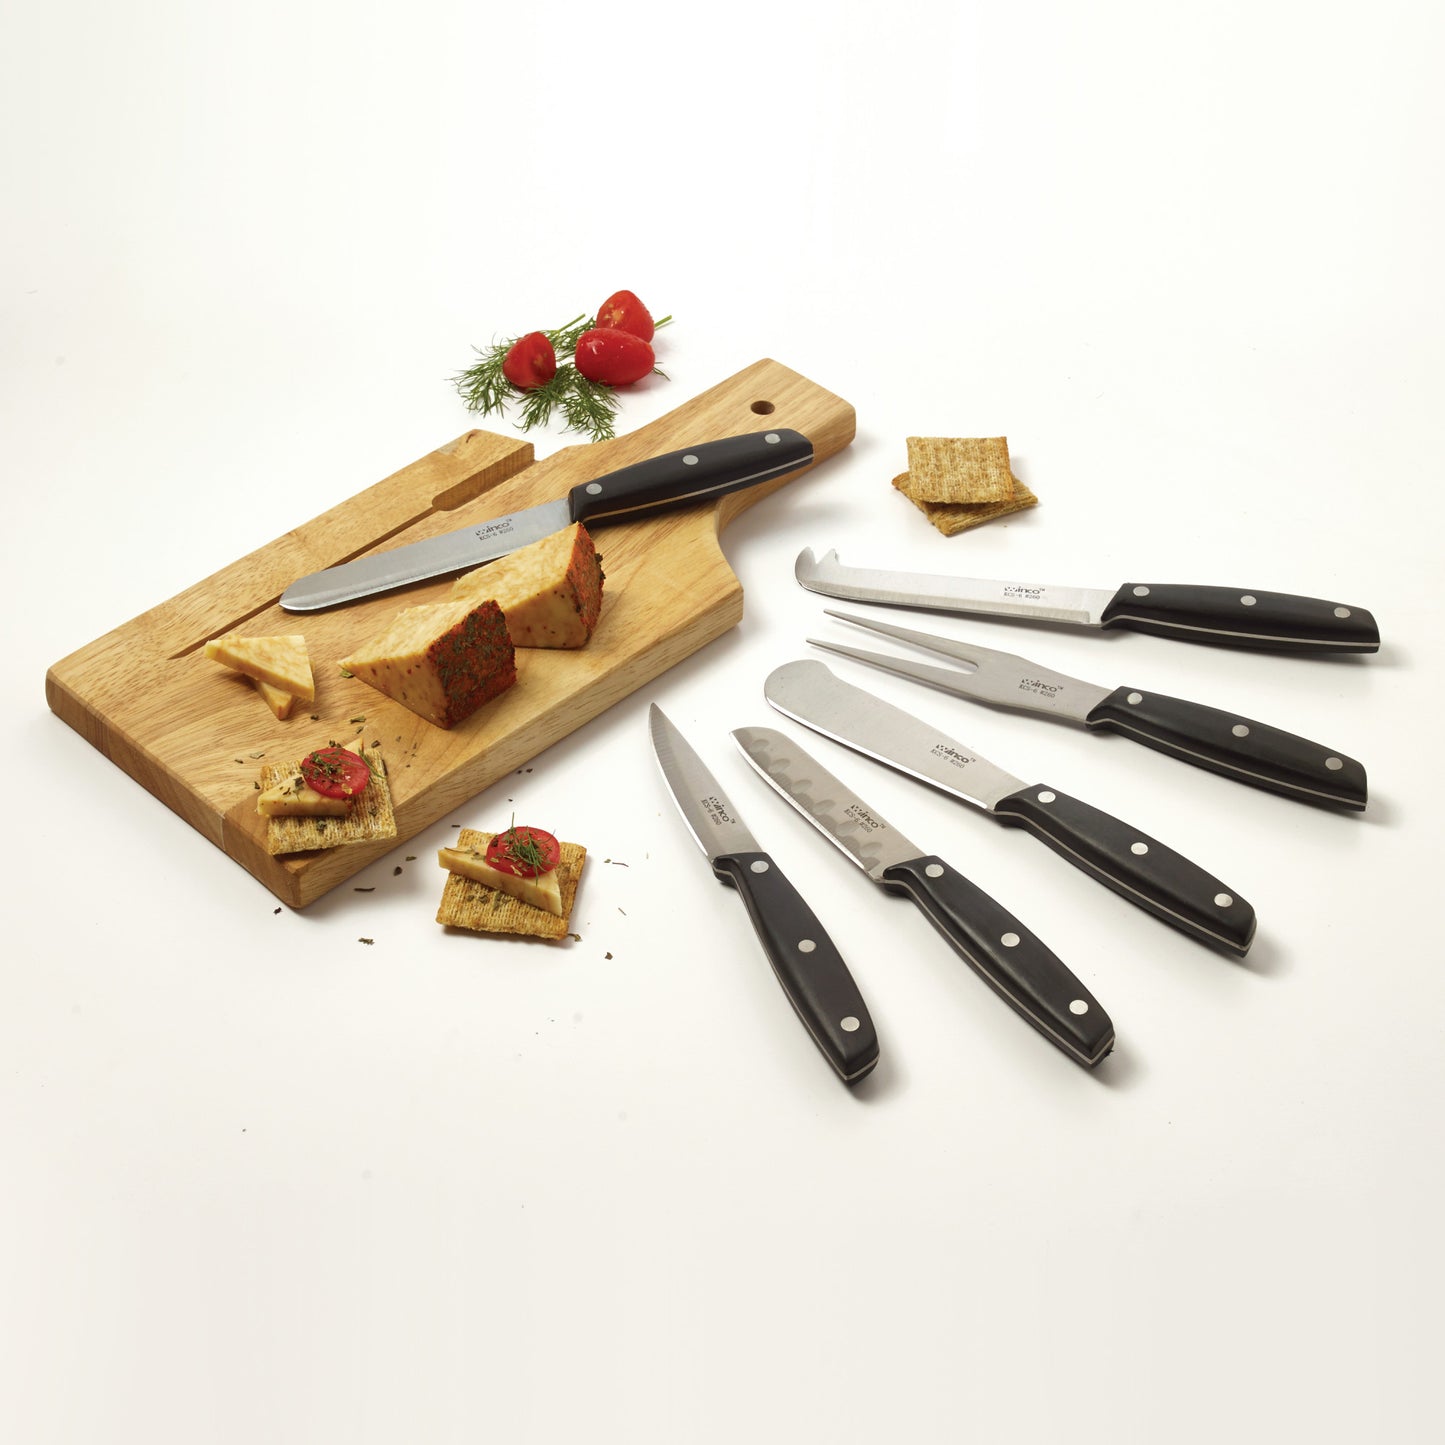 KCS-6 - Cheese Knife Set with POM Handles